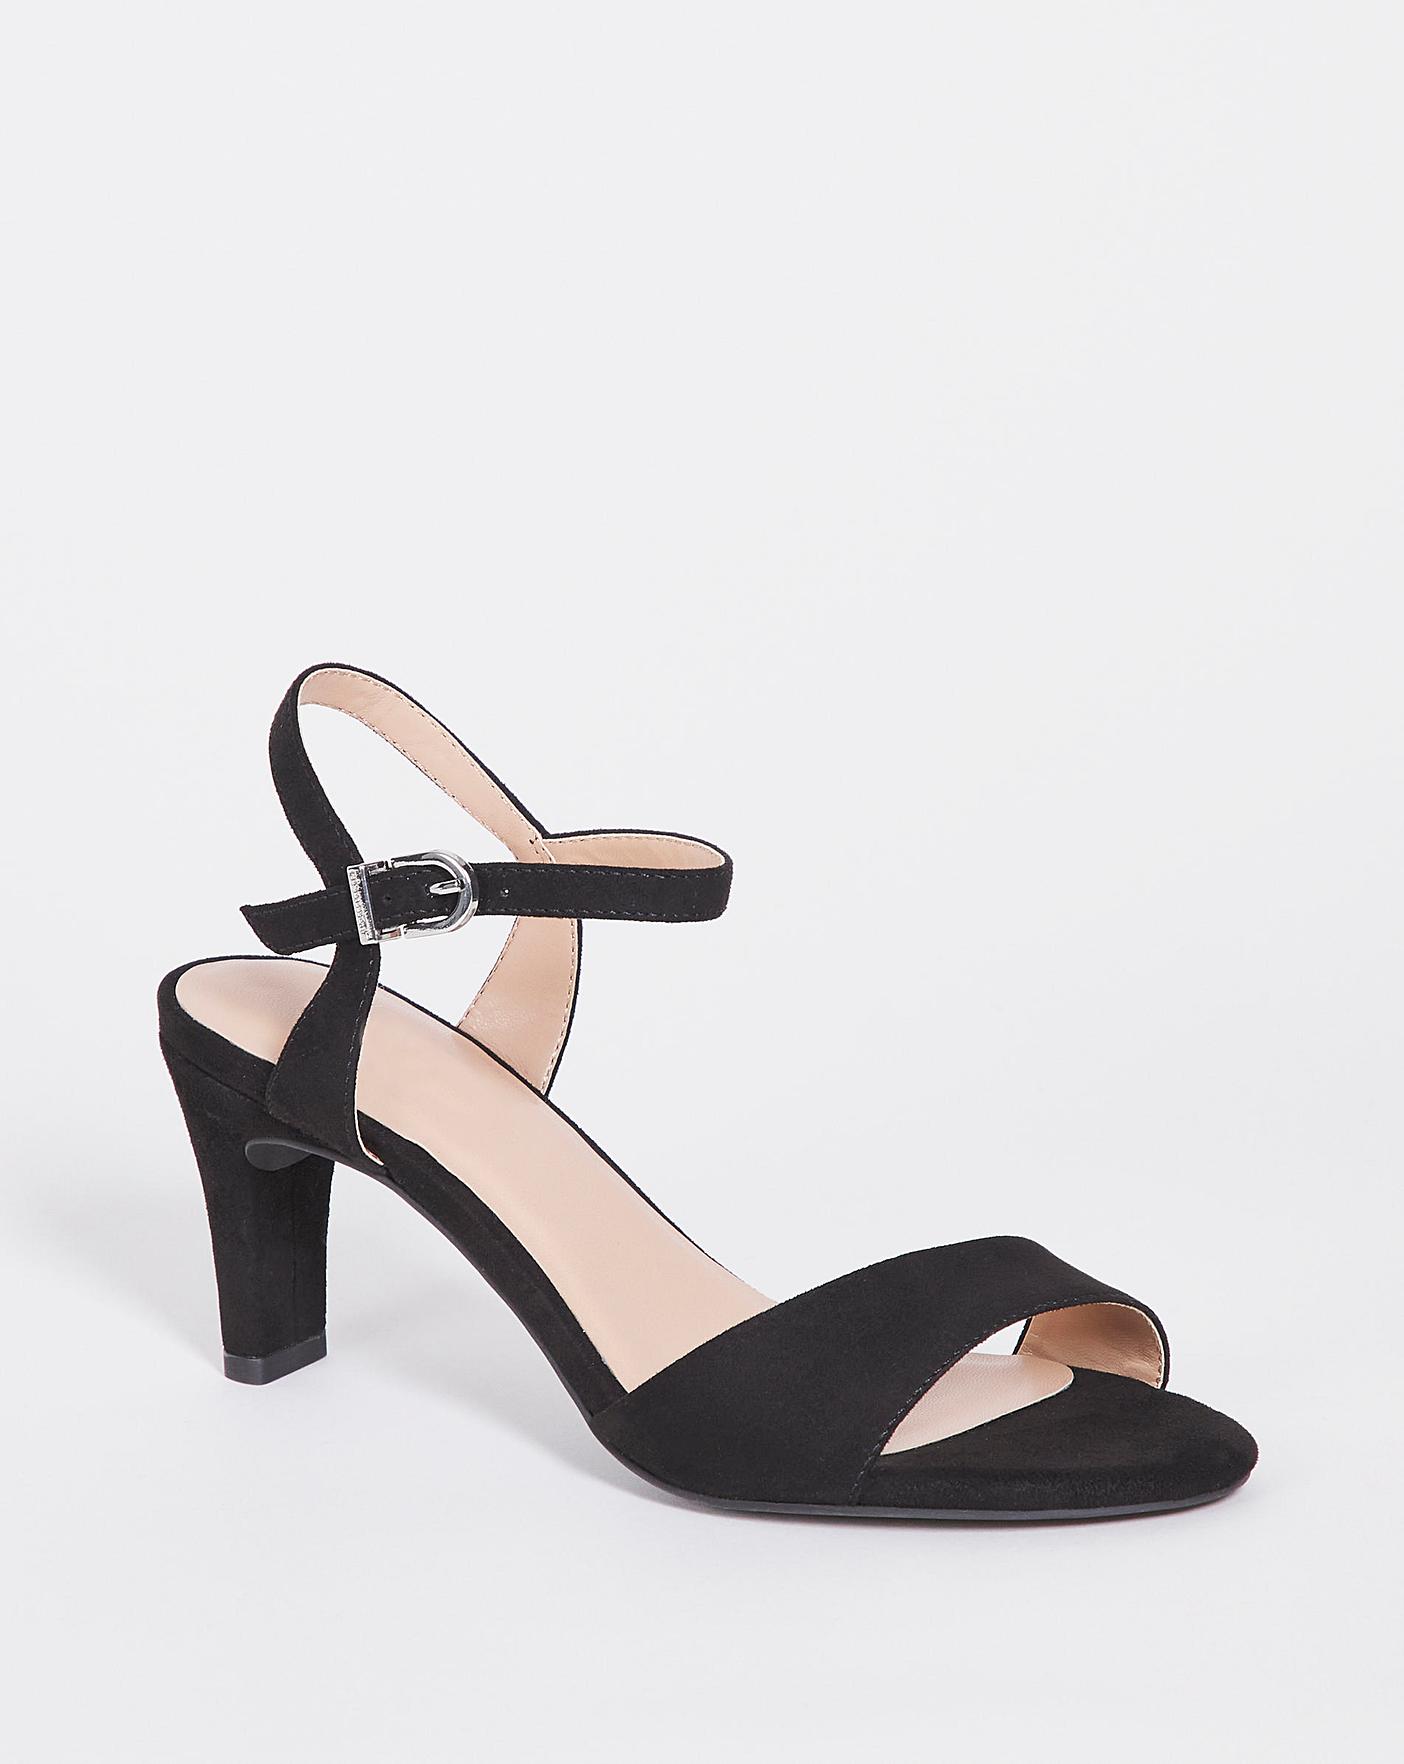 Black Barely There Sandals by Kaleidoscope | Kaleidoscope